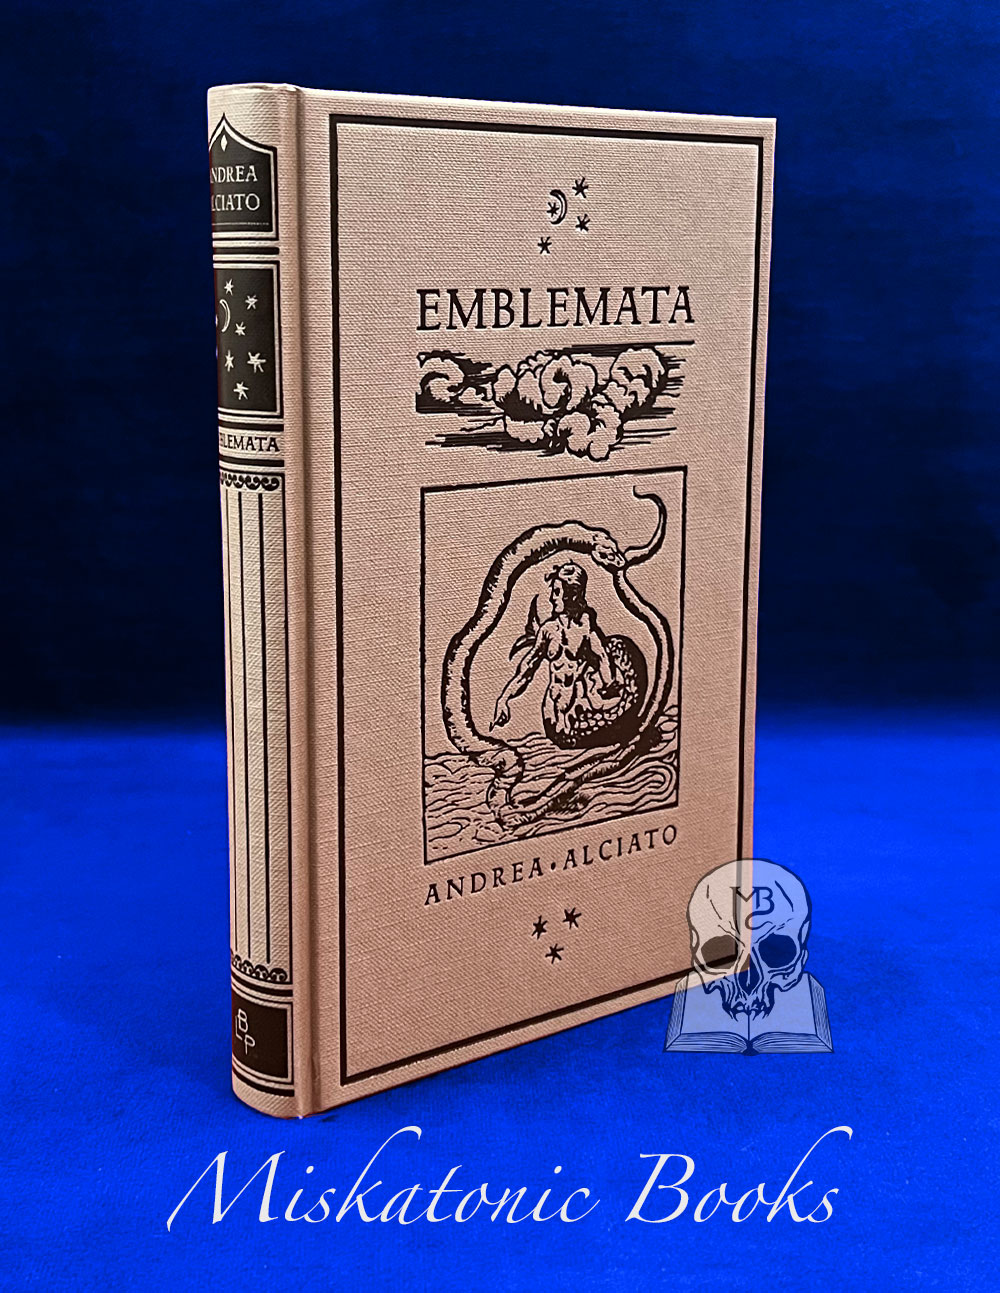 EMBLEMATA by Andrea Alciato, translated by Paul Summers Young (Limited Edition Hardcover)